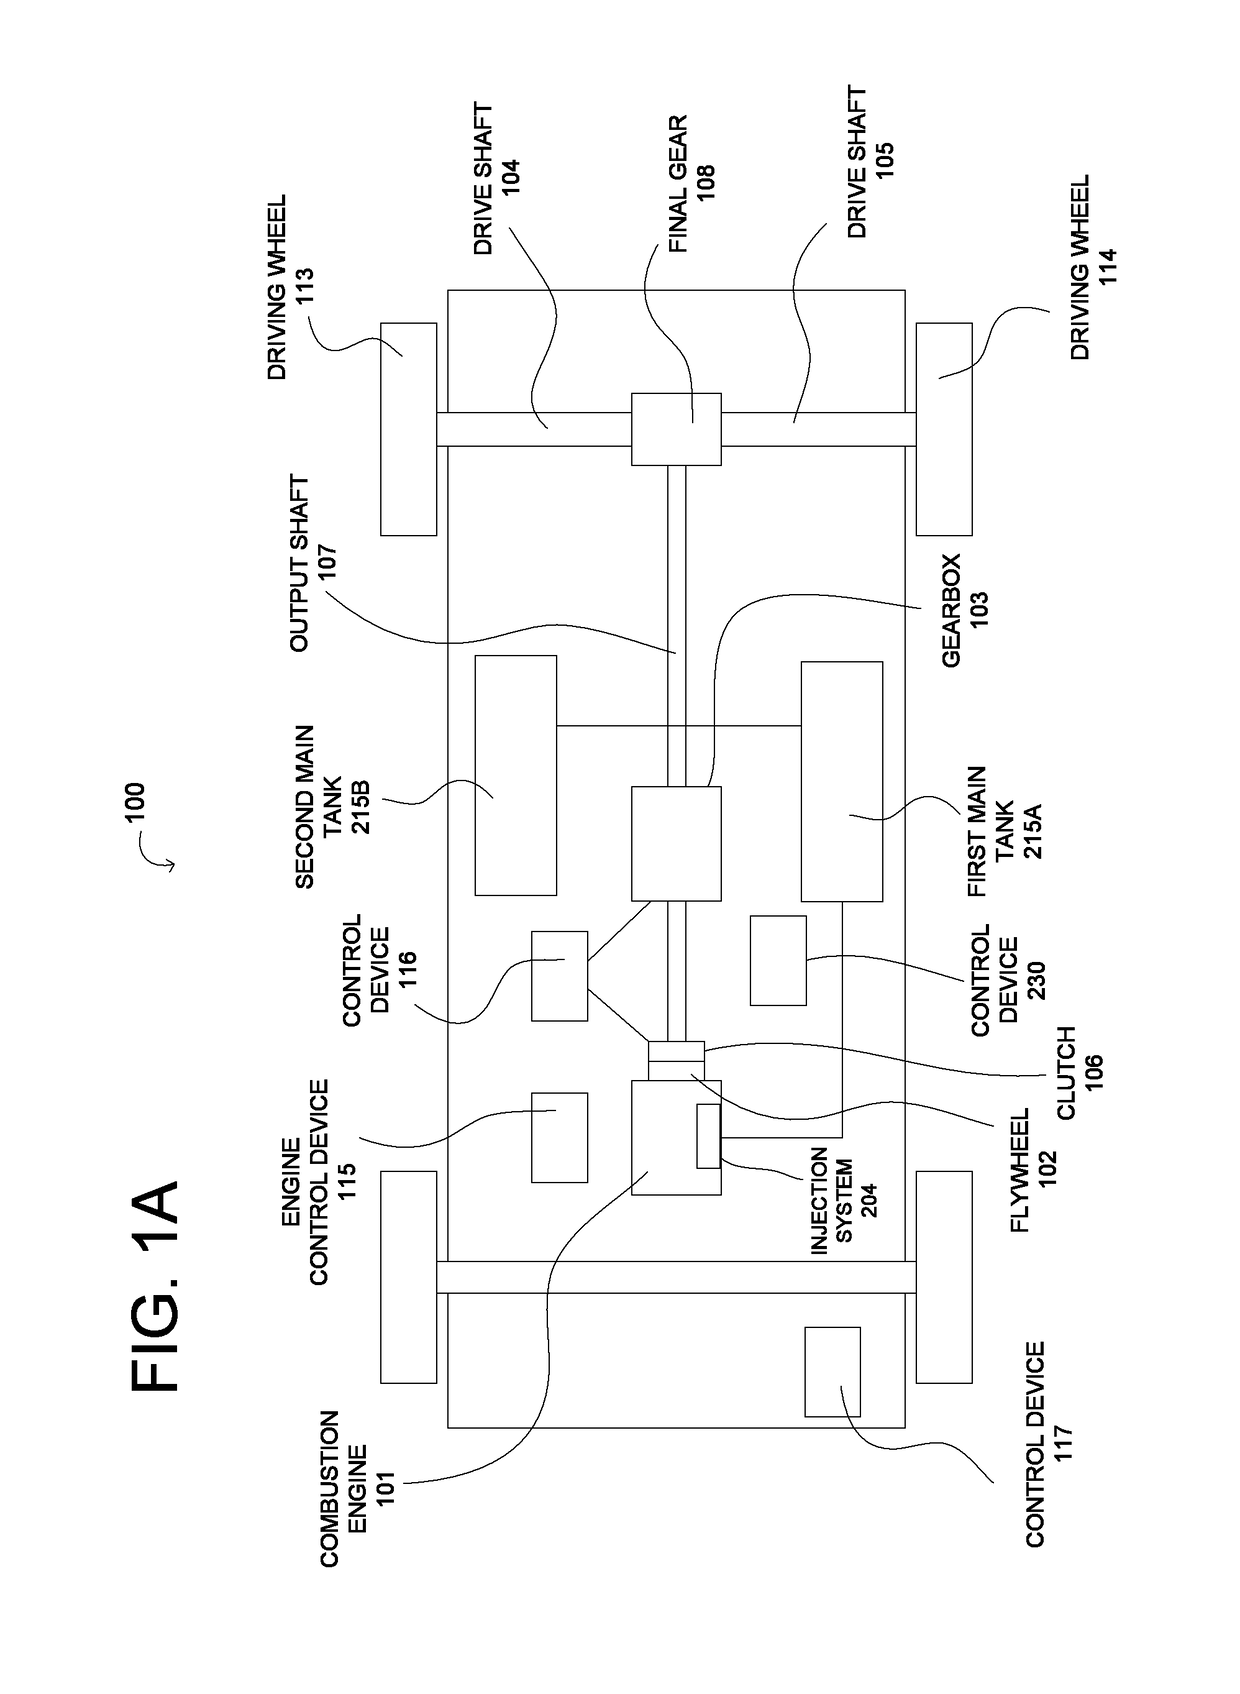 Method and system to determine a range for a vehicle